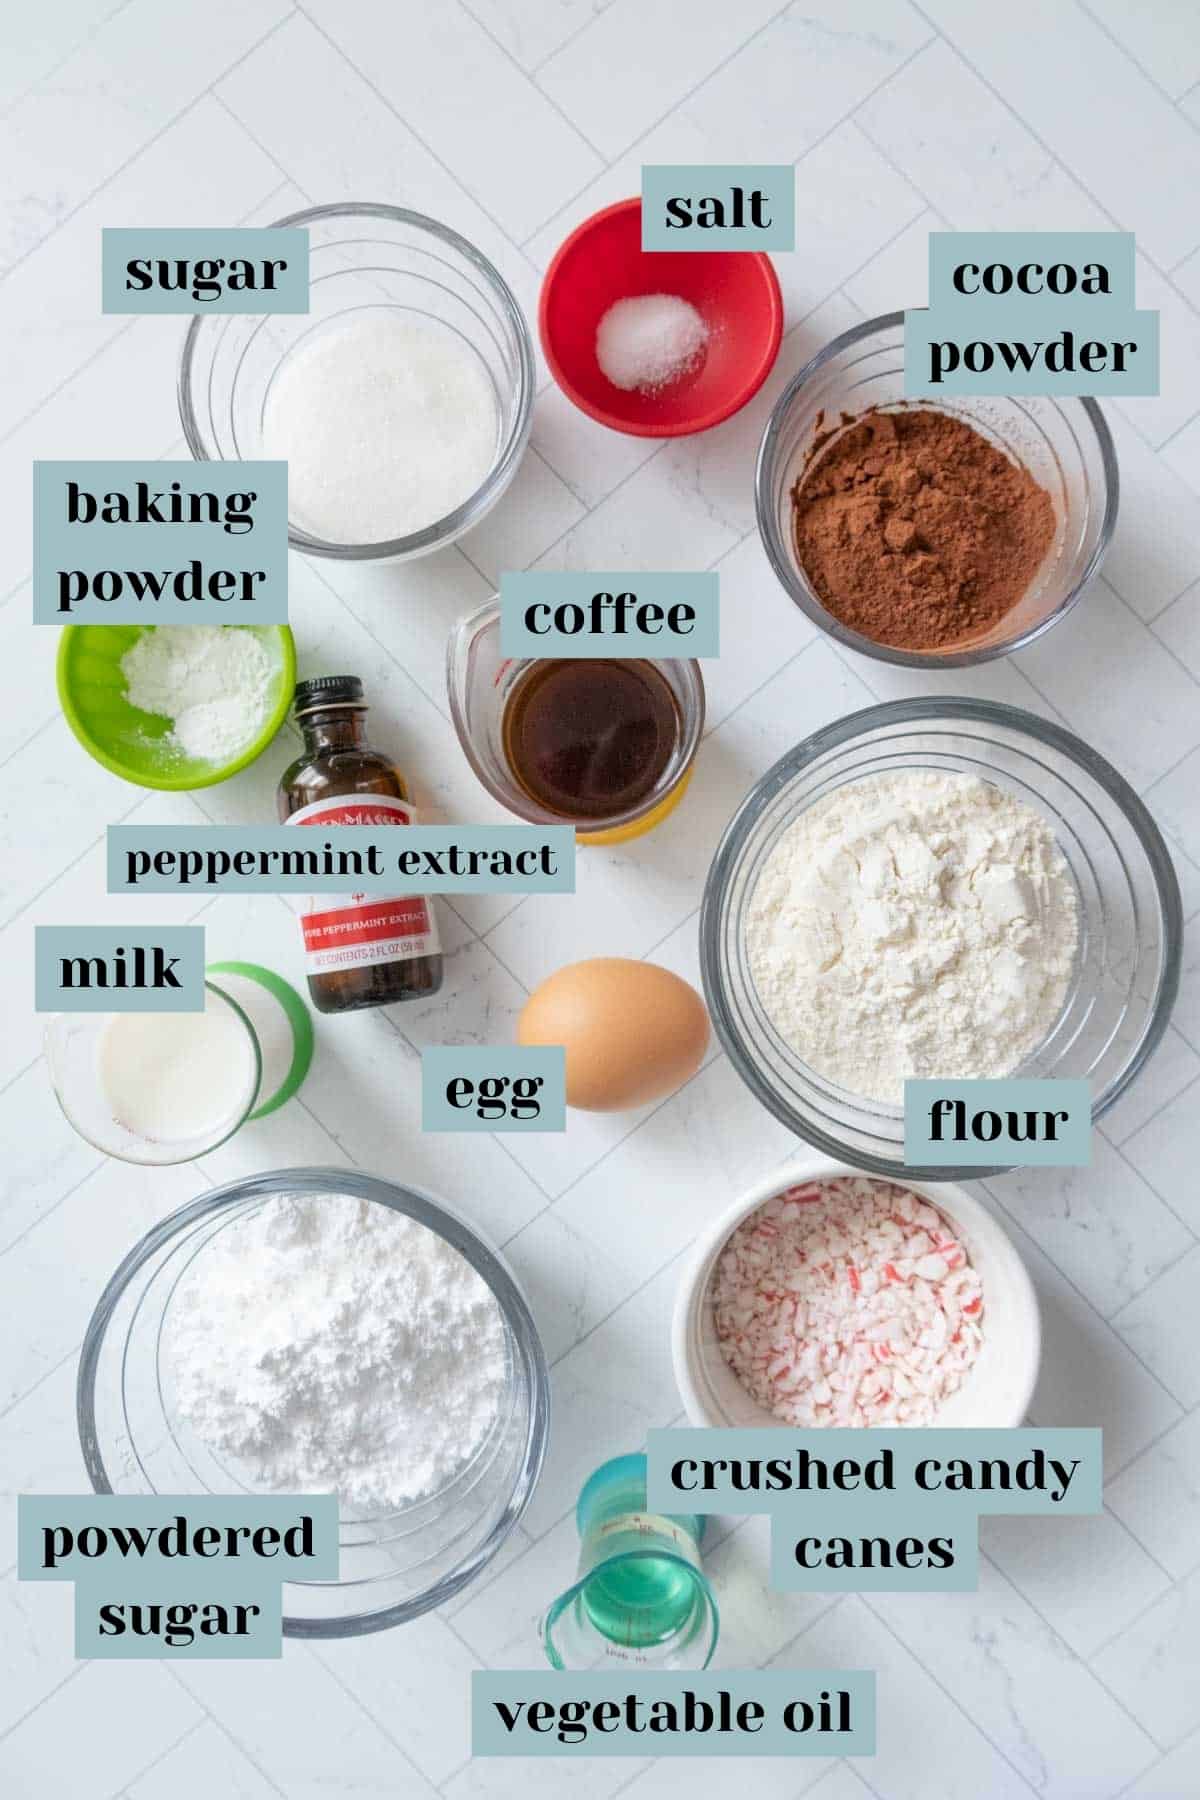 A list of ingredients for a baked donut recipe.